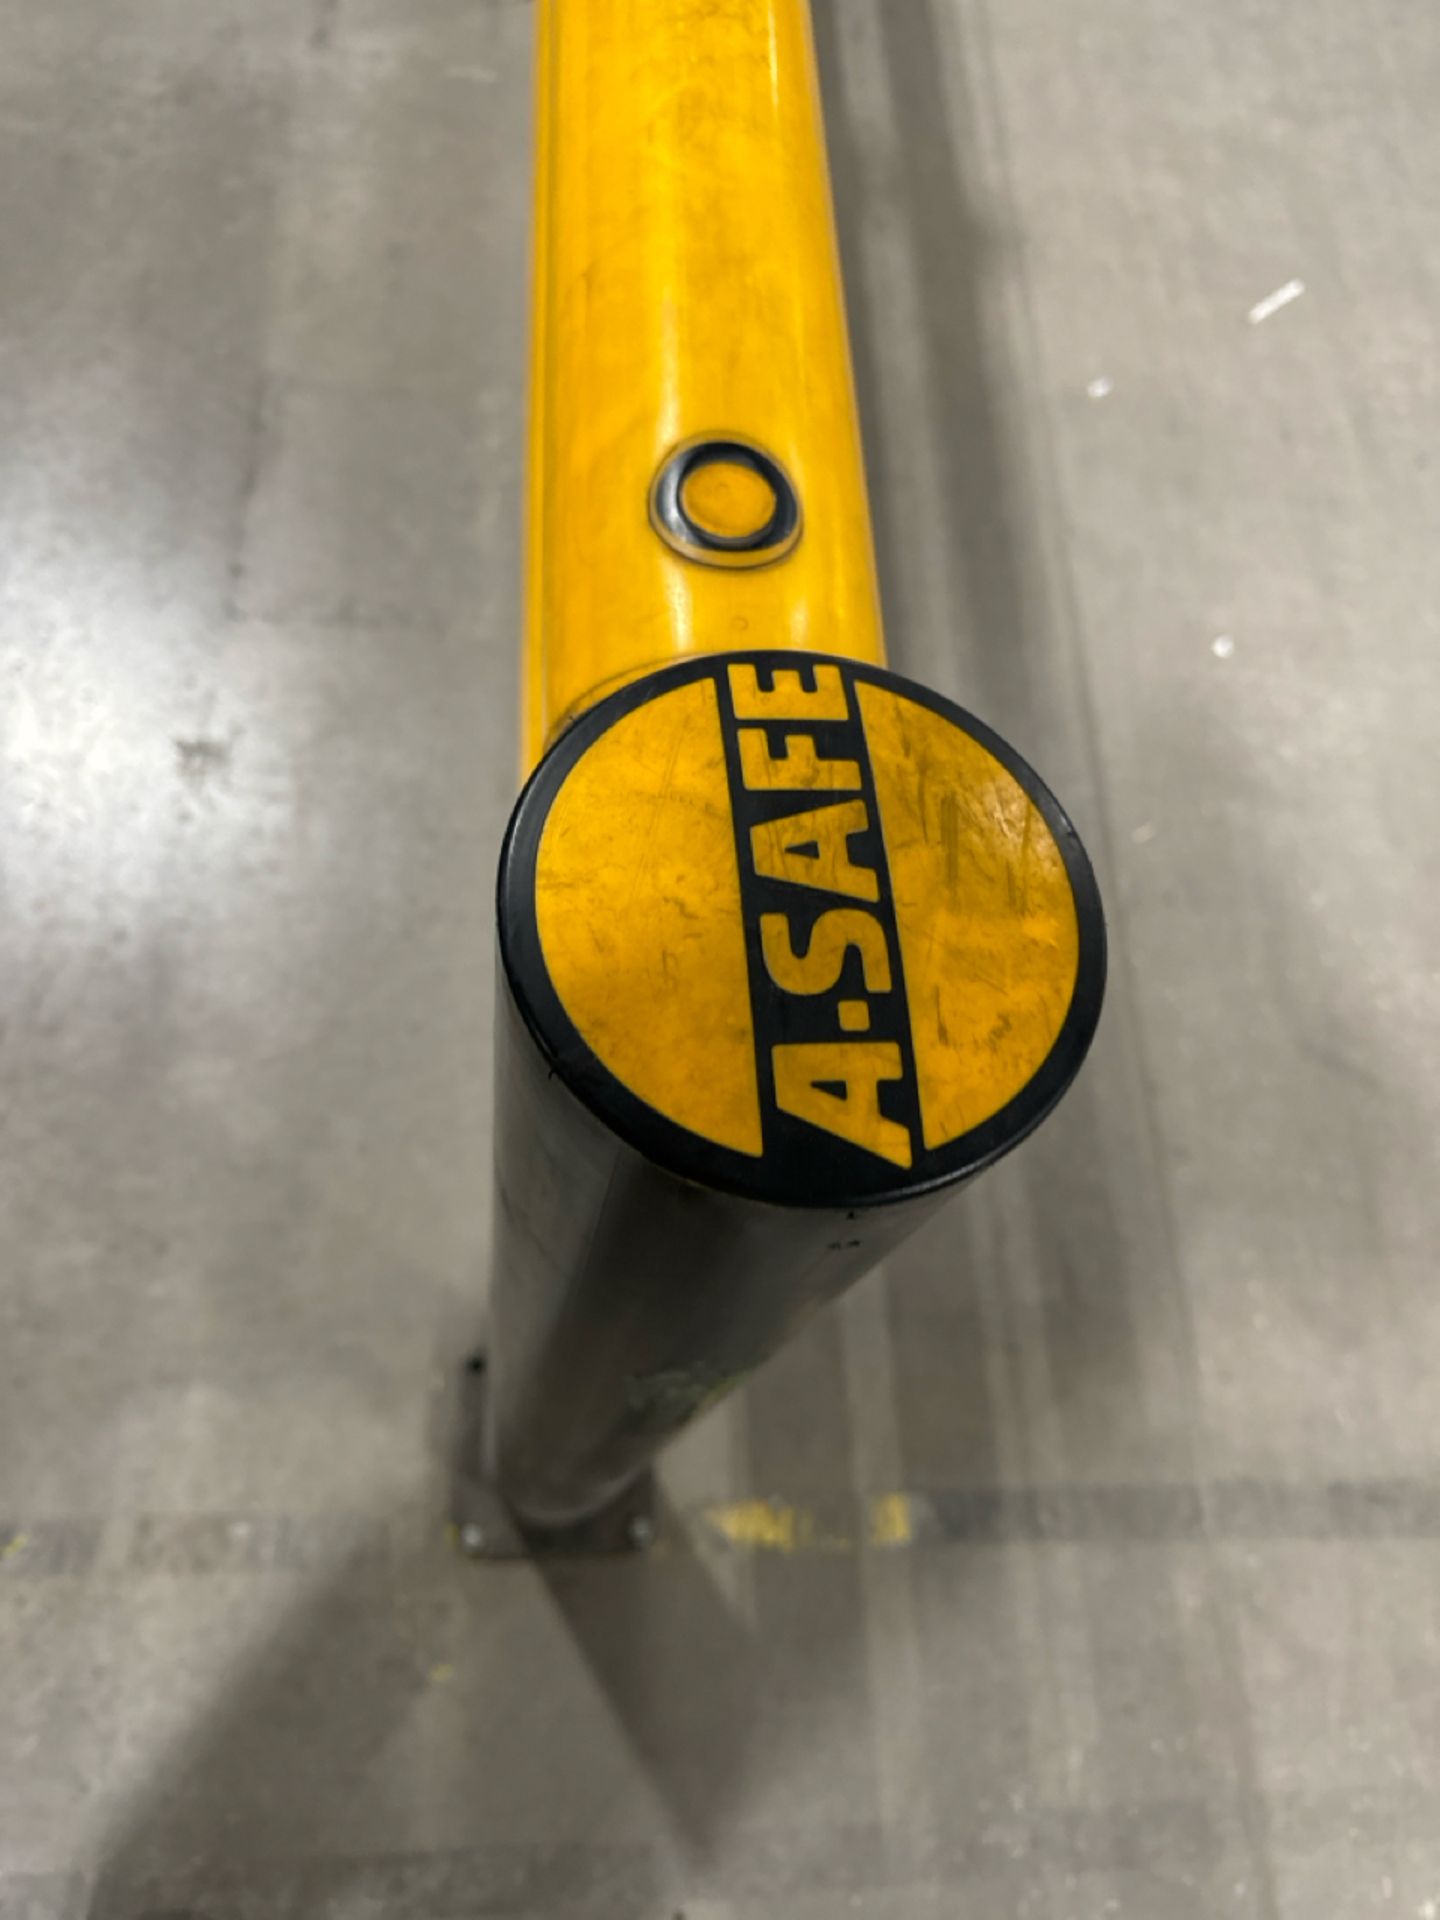 A-Safe Safety Barrier Yellow & Black Plastic Barri - Image 6 of 7